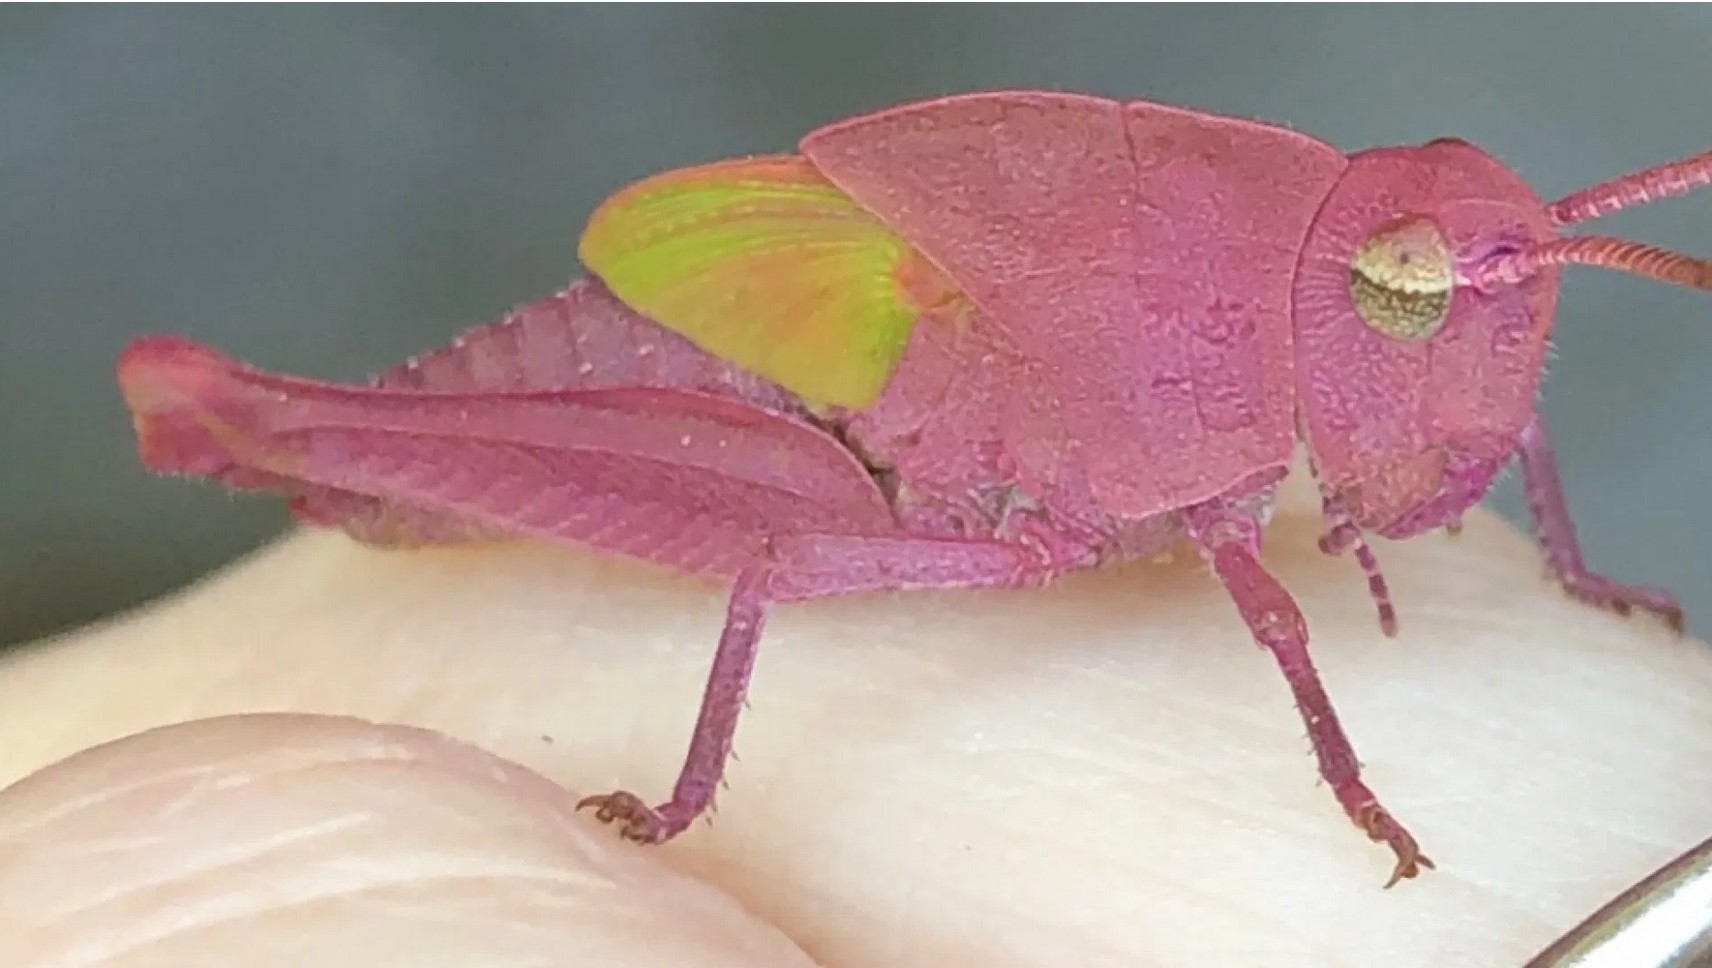 Extremely rare pink grasshopper photographed in Texas - Strange Sounds